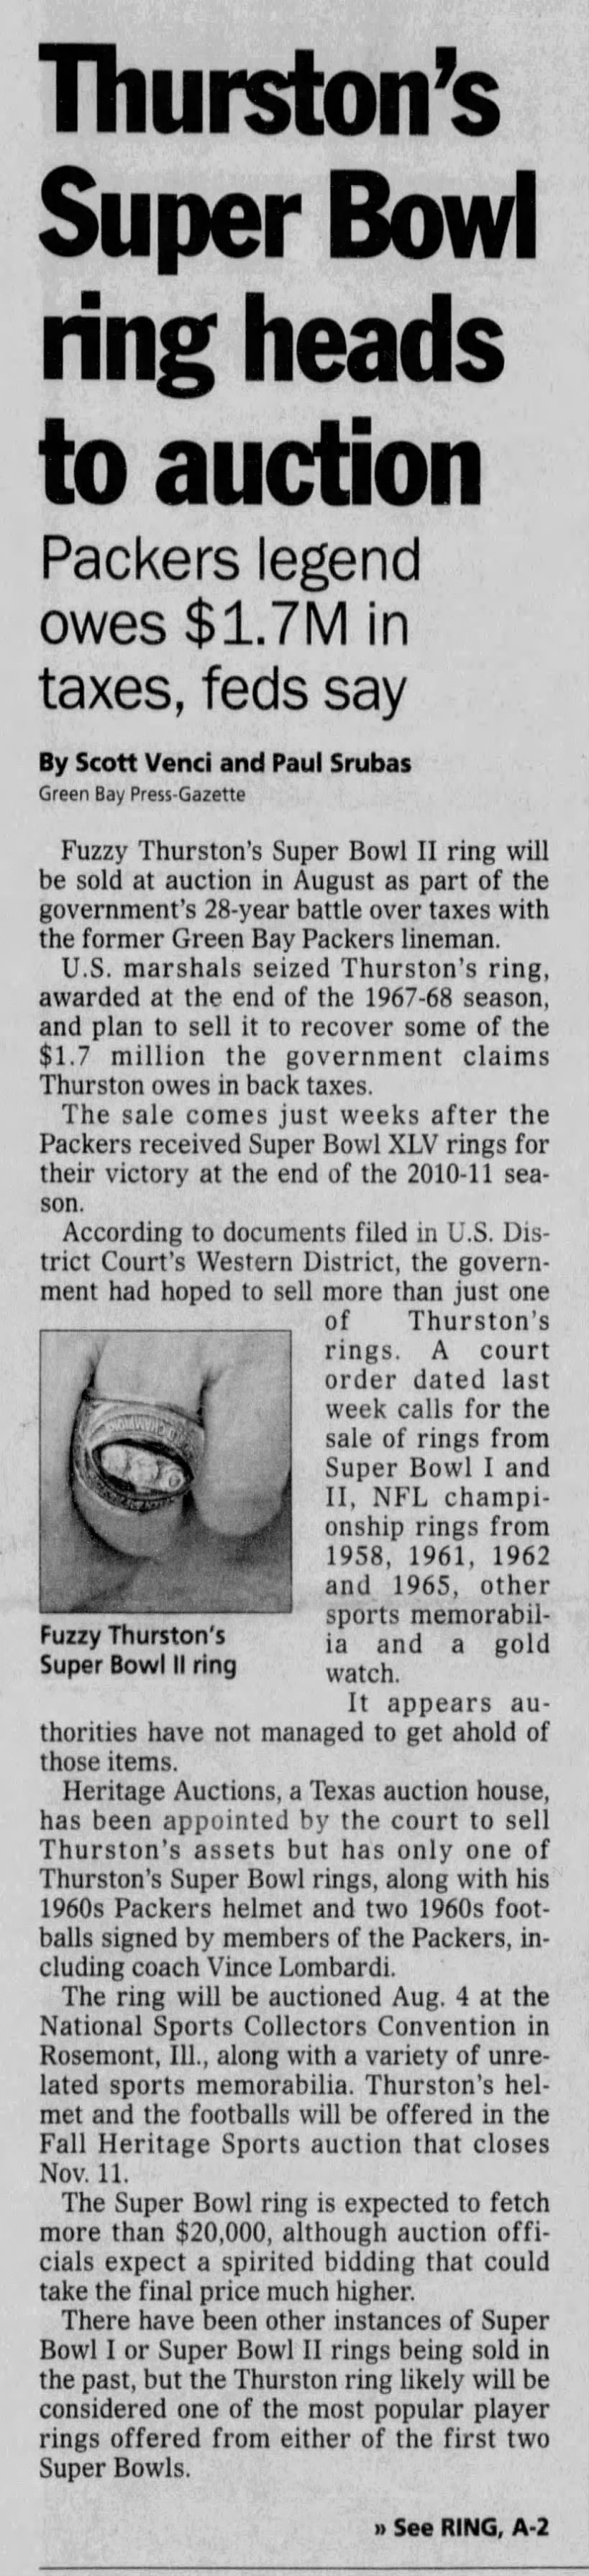 Thurston's Super Bowl ring heads to auction